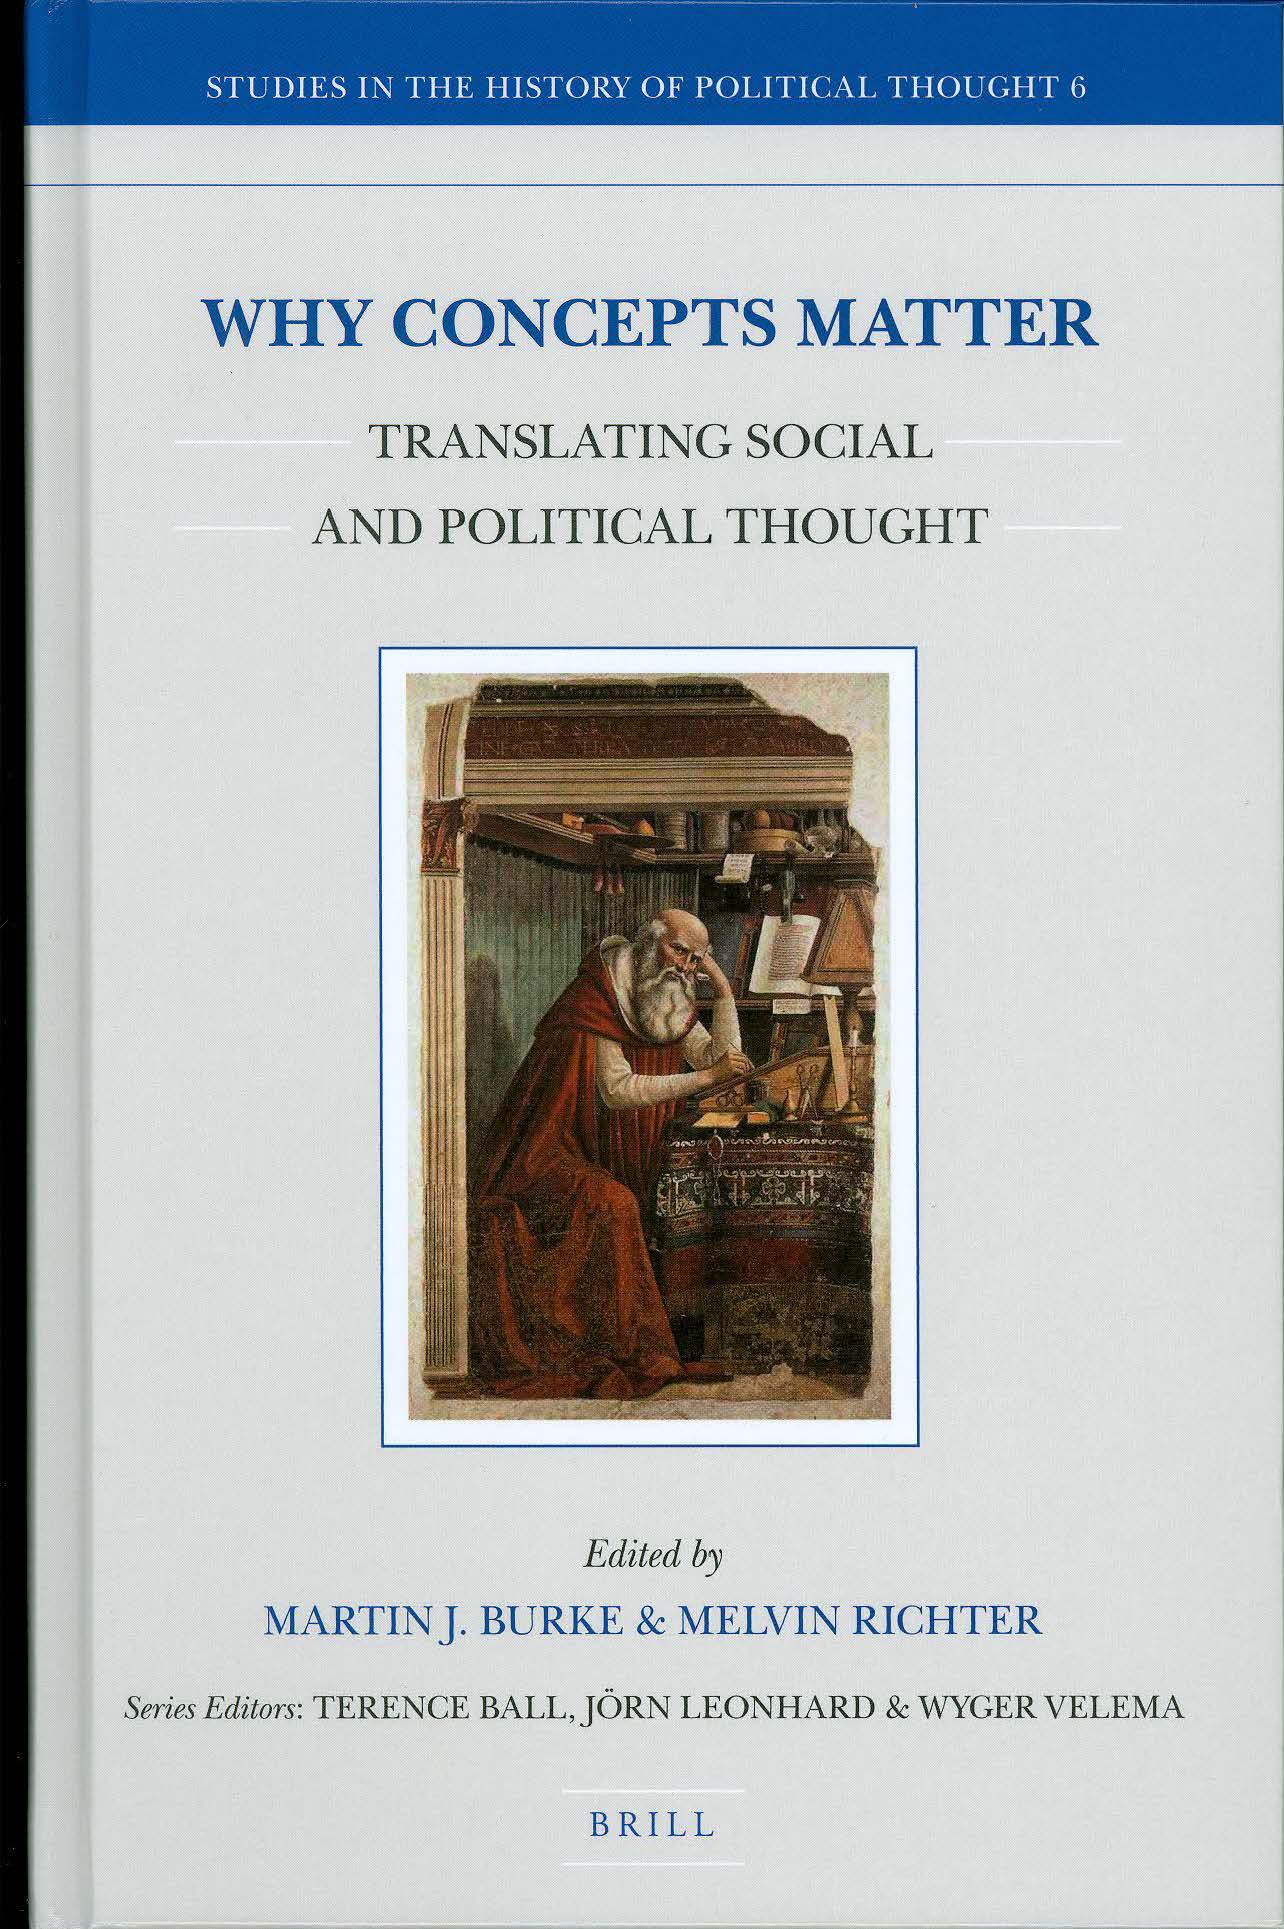 Studies in the History of Political Thought 6